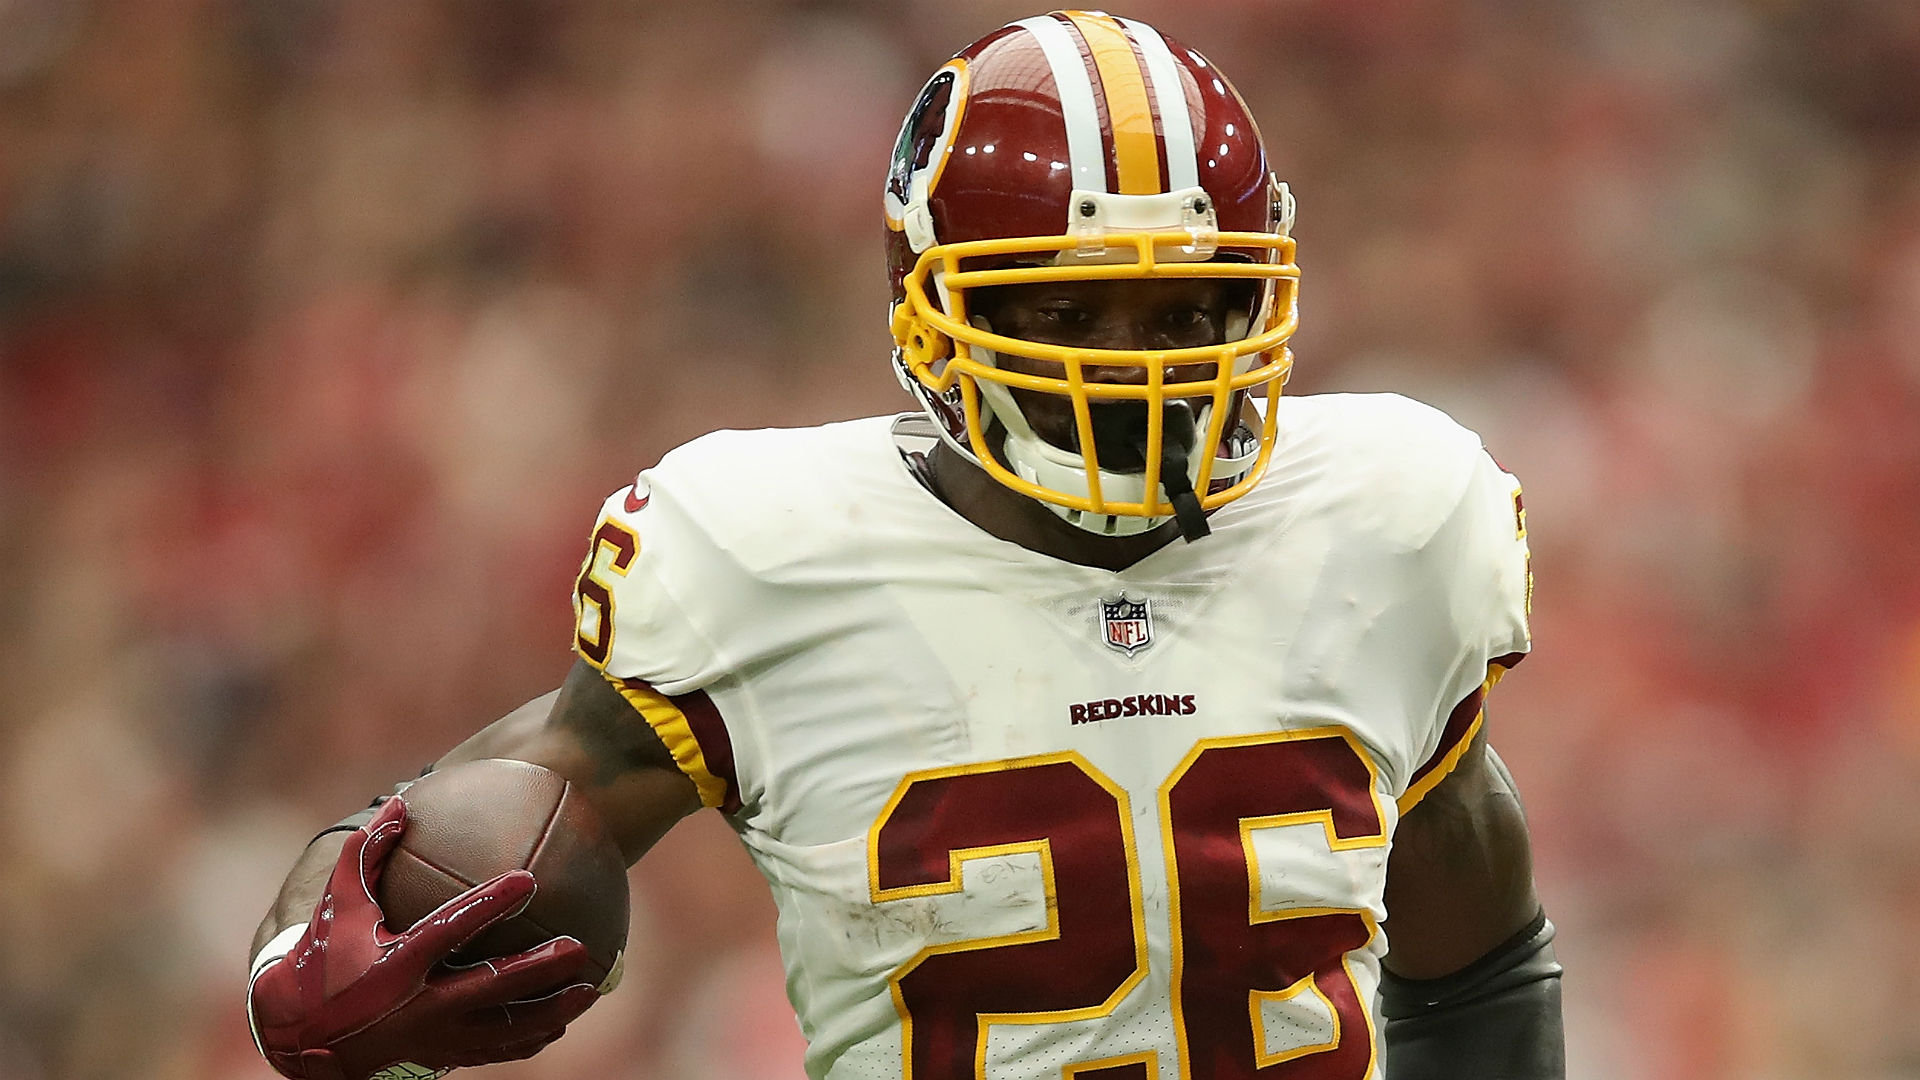 Redskins injury updates: Adrian Peterson expected to play against Panthers; Jamison Crowder, Chris Thompson will be out